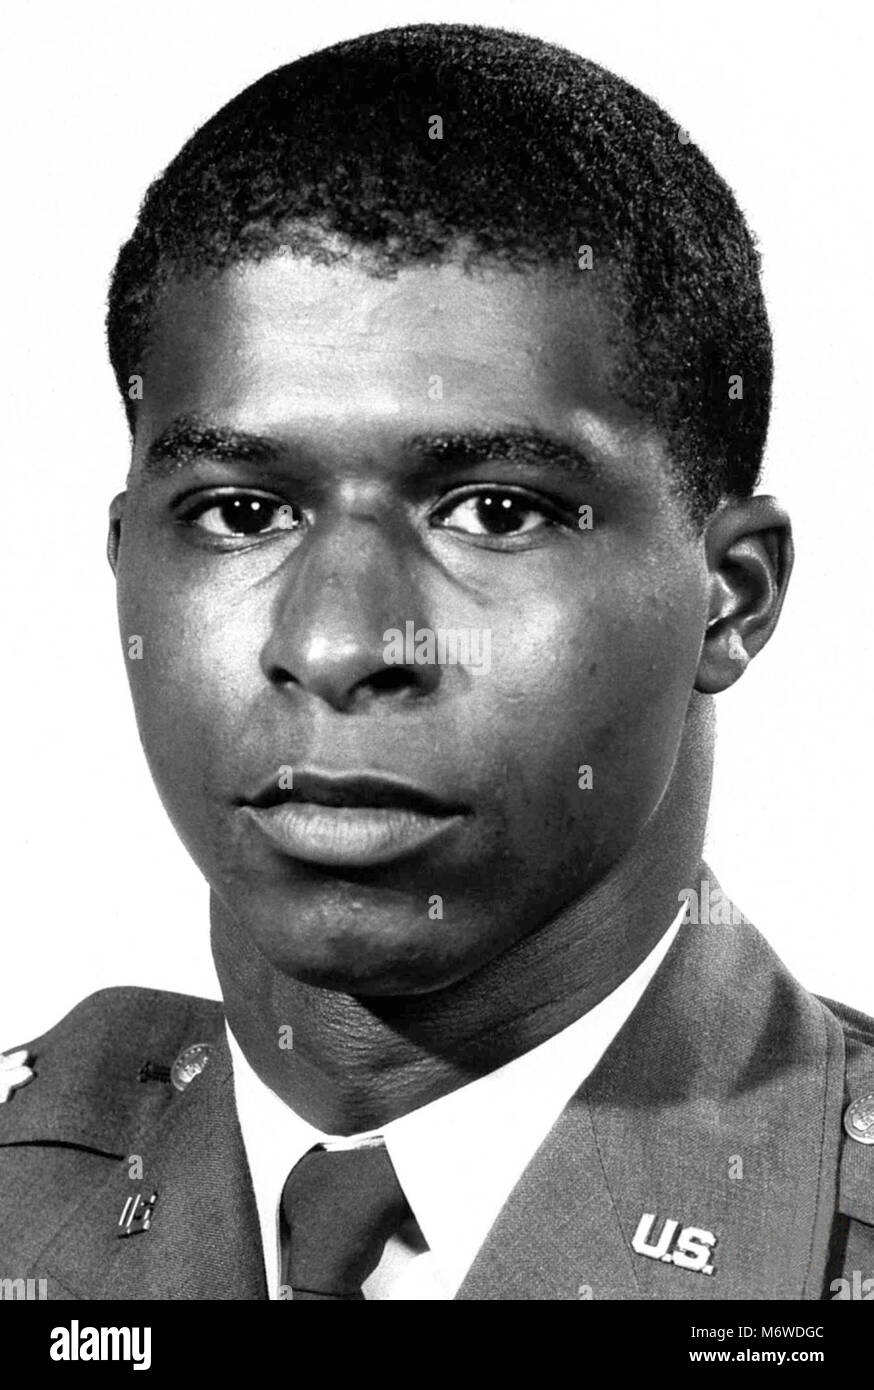 Robert Lawrence, Robert Henry Lawrence Jr. (1935 - 1967), (Major, USAF), United States Air Force Officer e il primo astronauta afro-americano Foto Stock